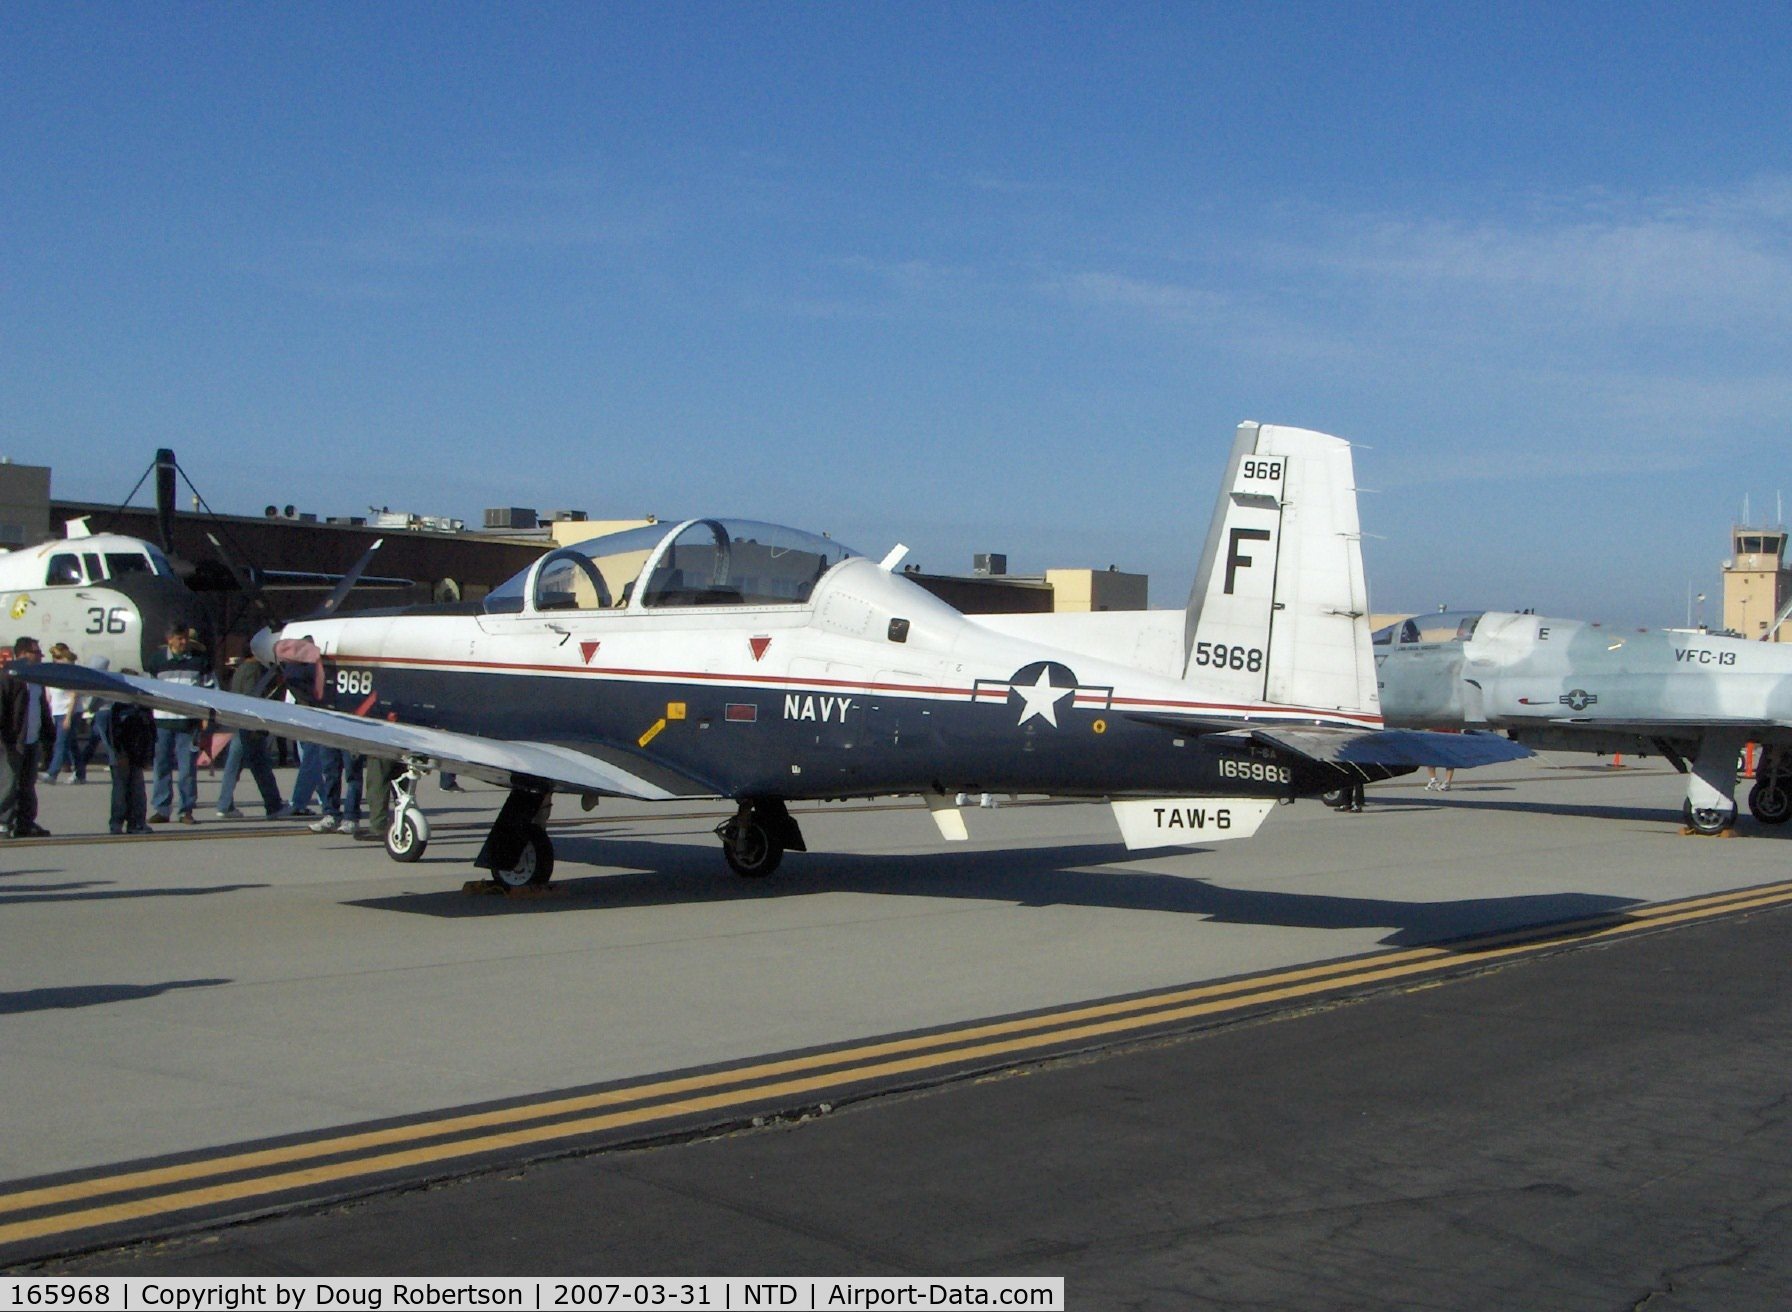 165968, Raytheon T-6A Texan II C/N PT-111, Beech T-6A TEXAN II Trainer of Training Air Wing-6, one P&W (Canada) PT-6A-68 Turboprop flat rated at 1,100 shp driving constant 2,000 rpm prop